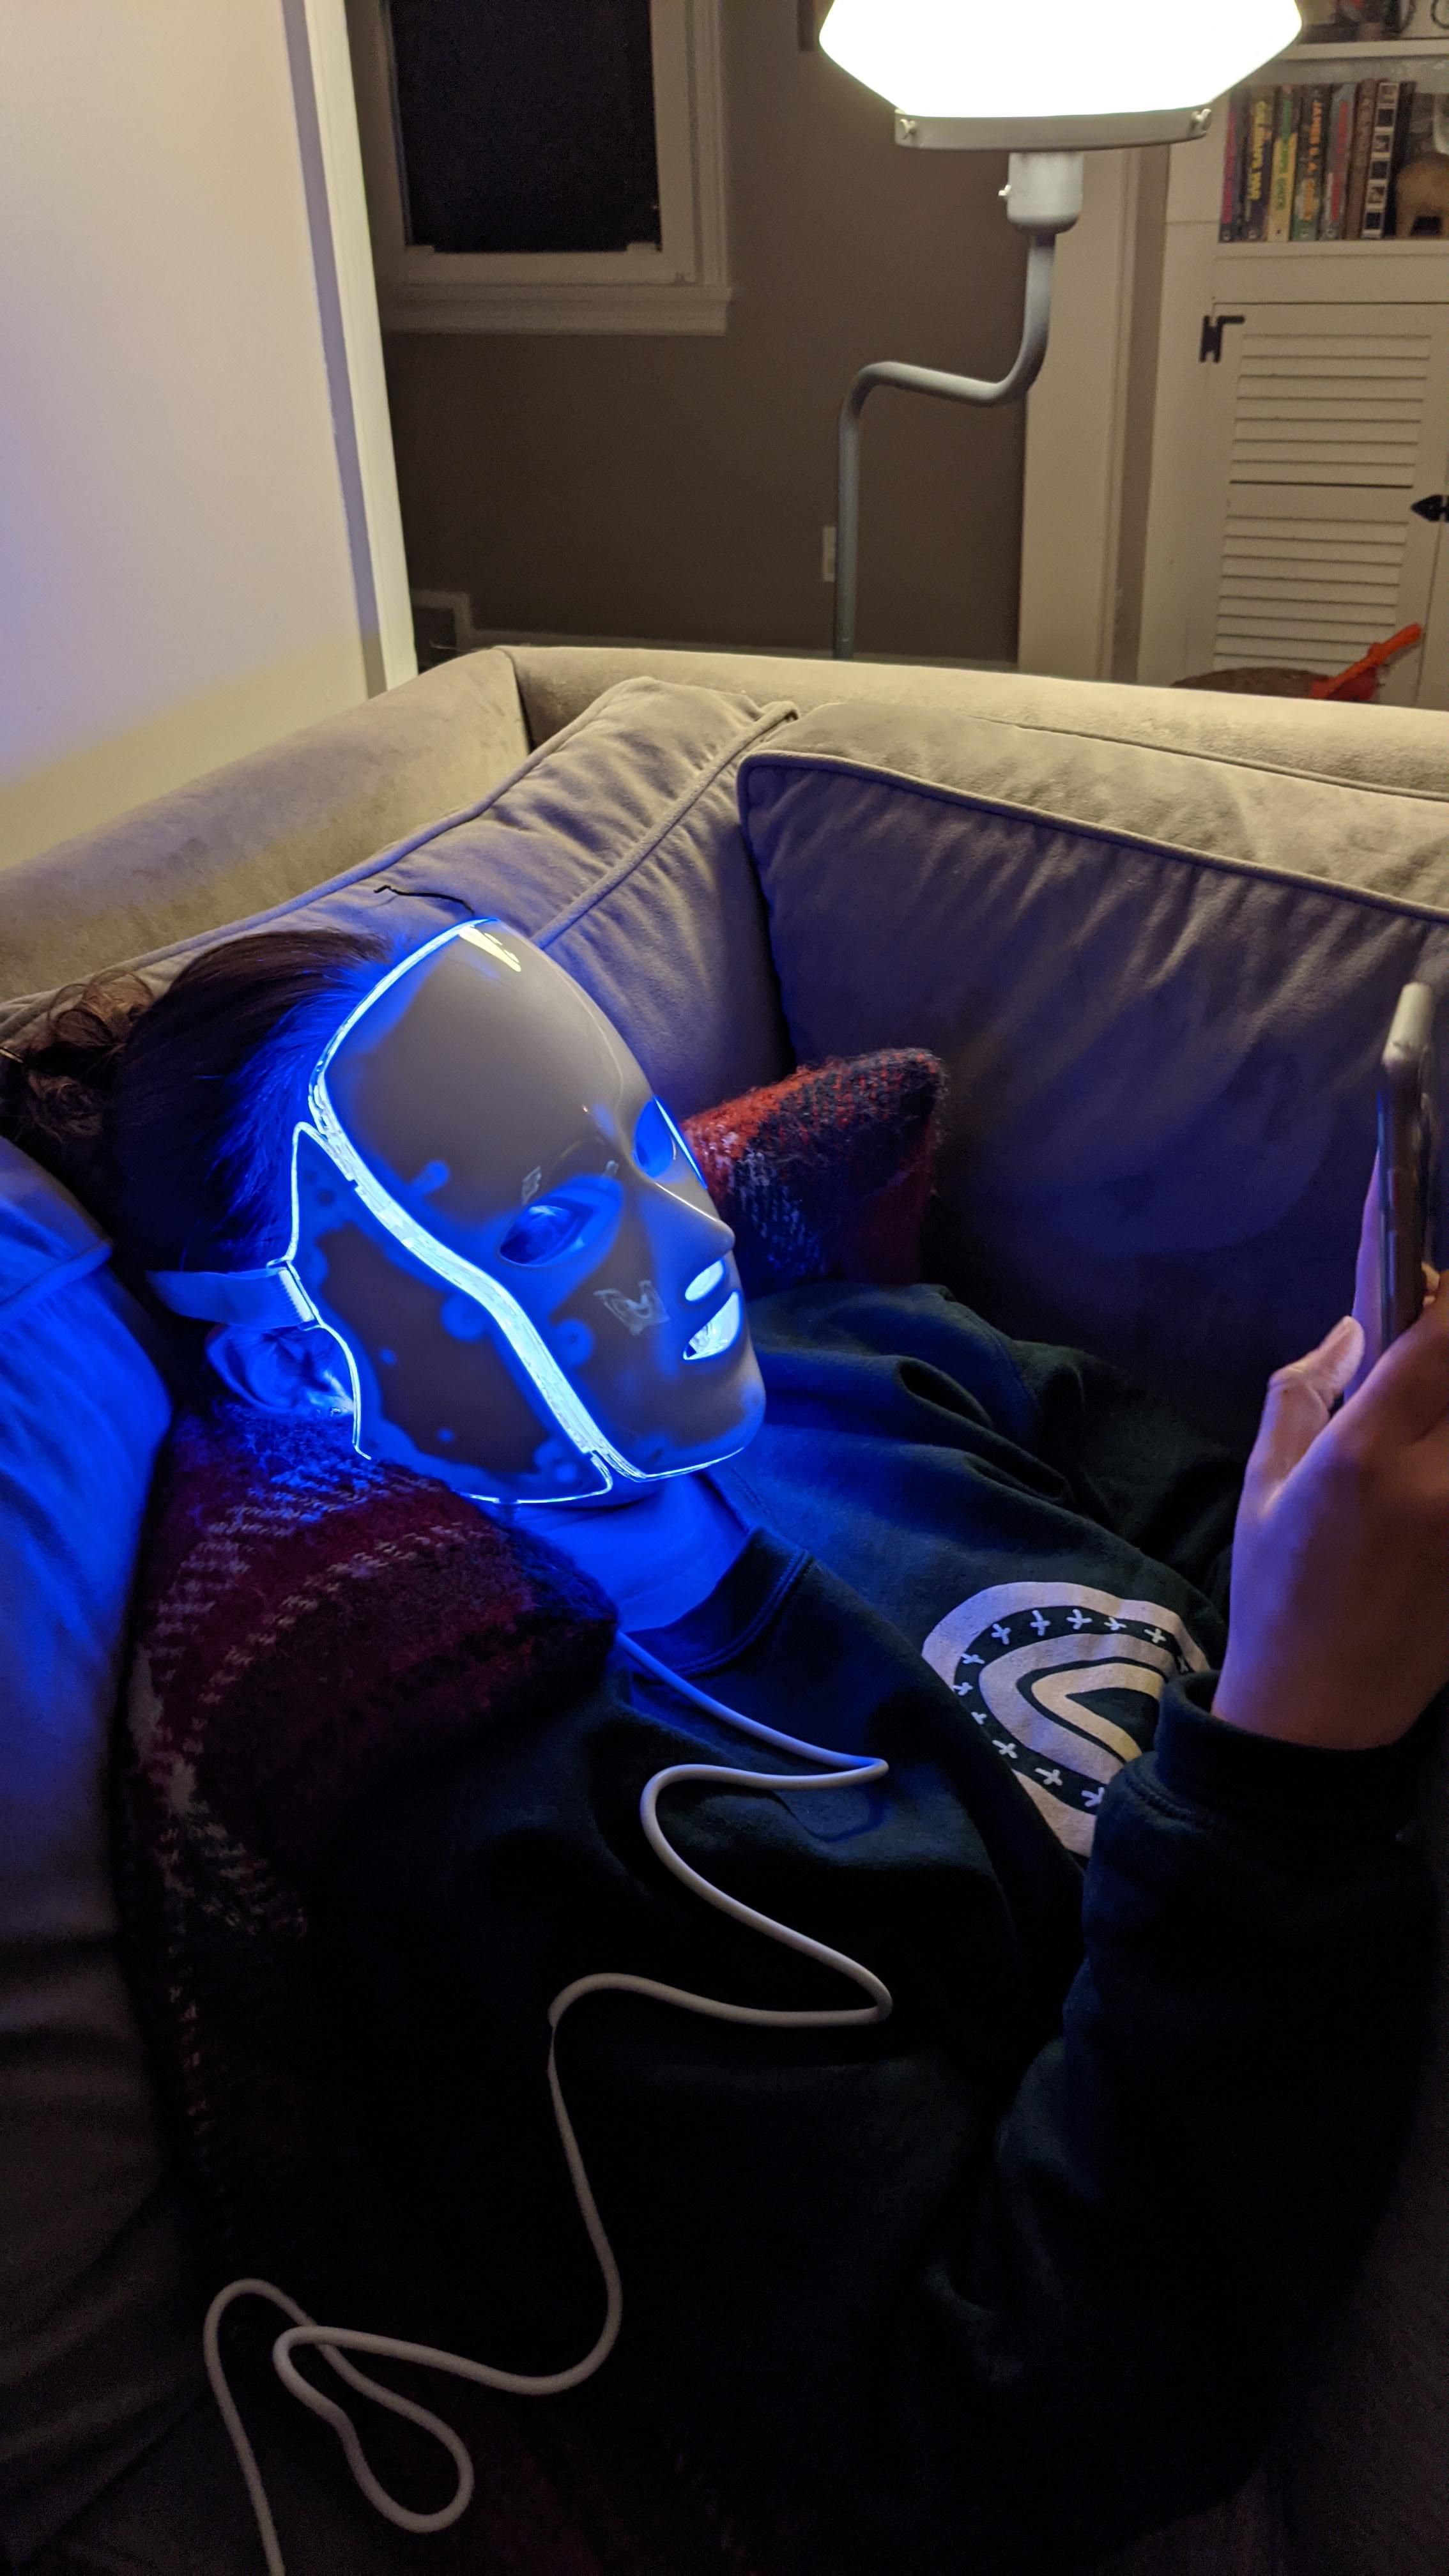 I think my wife is ready for Cyberpunk 2077.